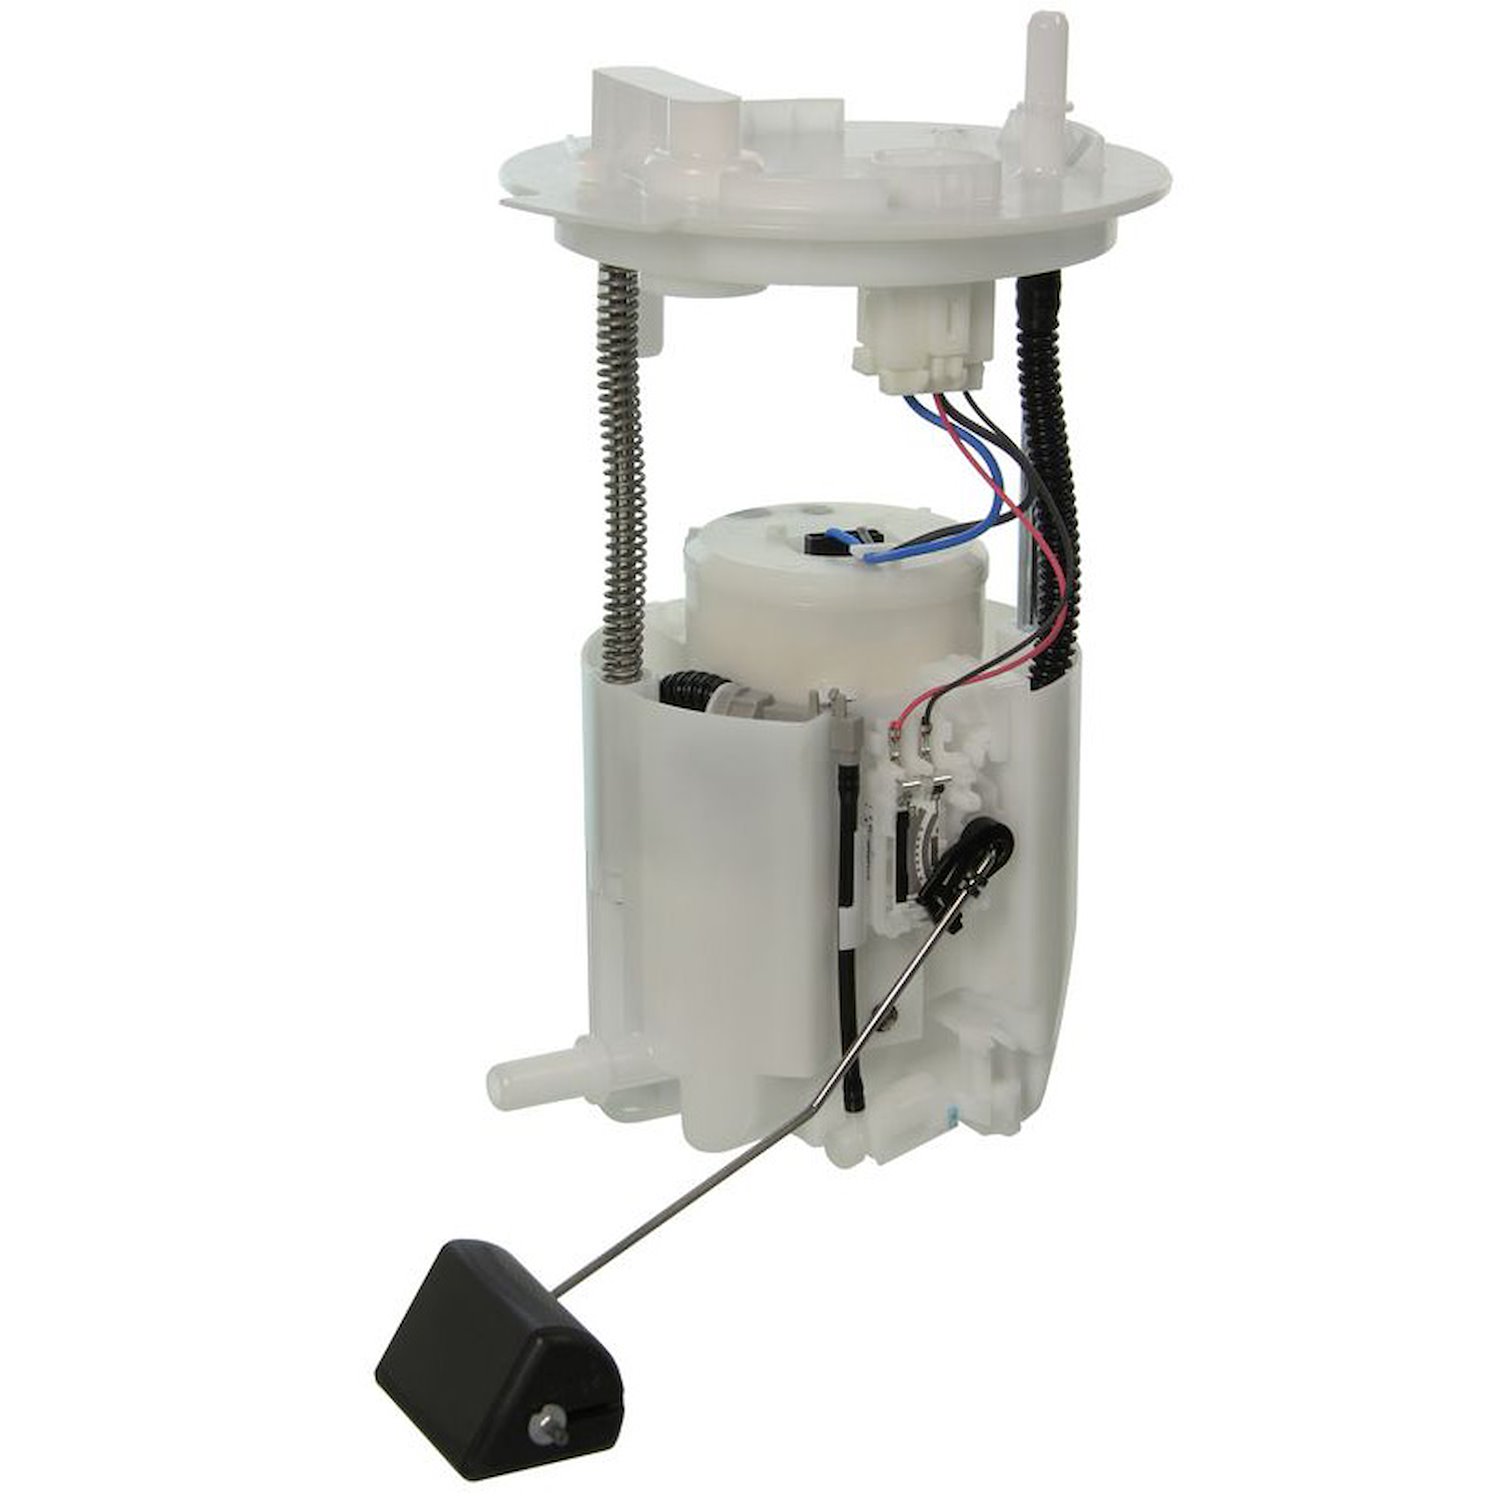 OE Ford Replacement Fuel Pump Module Assembly for 2010-2011 Mercury Mariner/2010-2012 Ford Escape